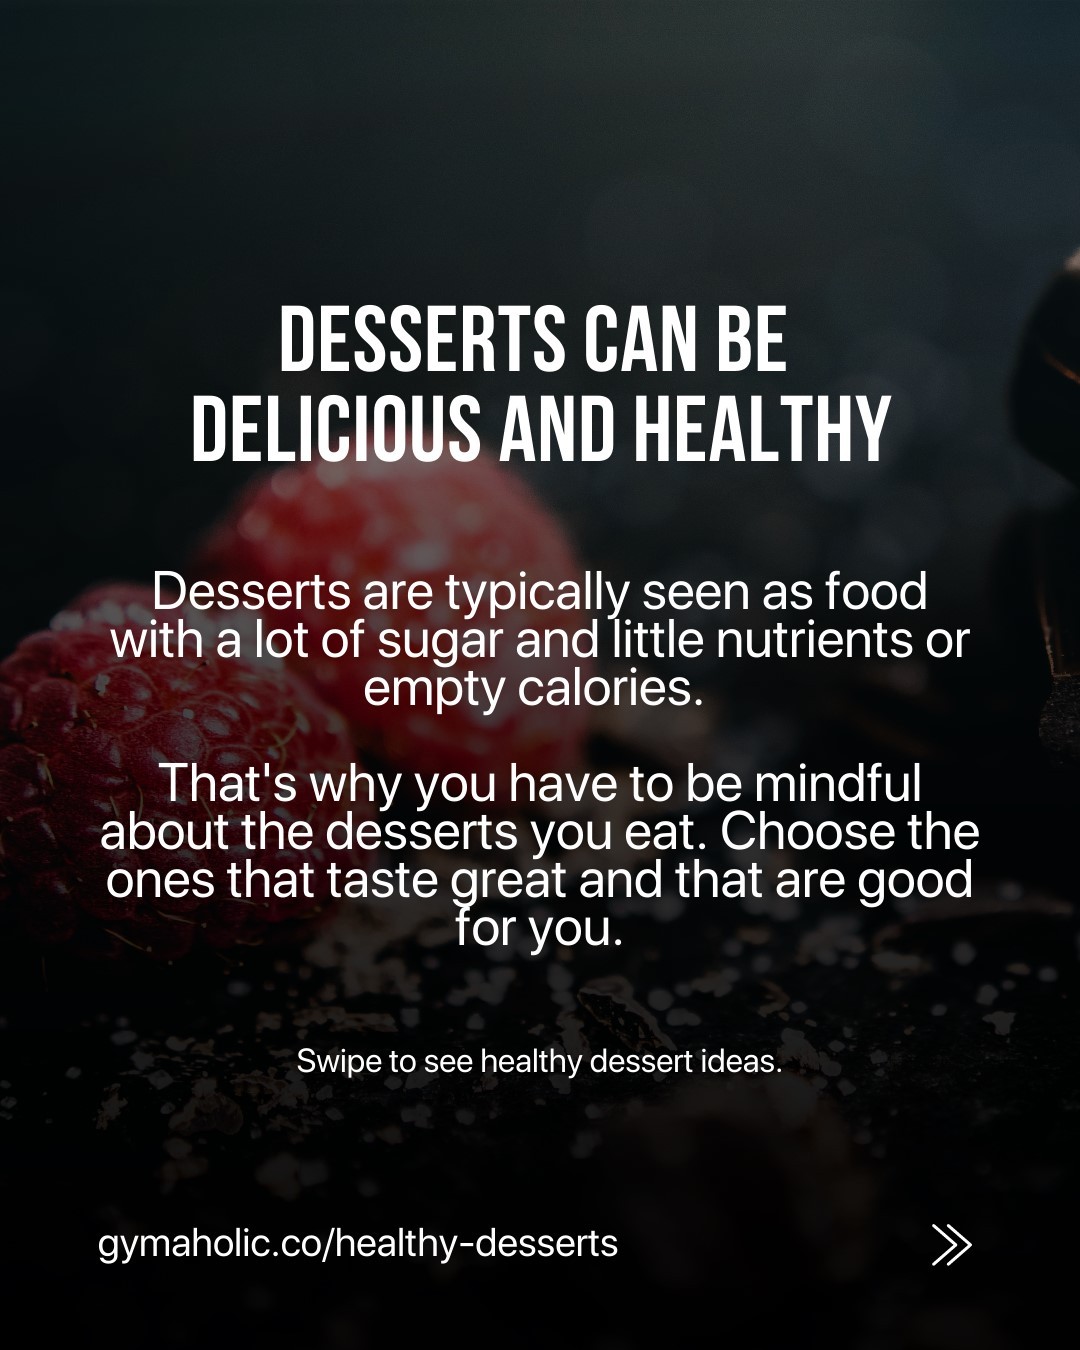 If you’re craving a dessert, make sure you choose one that is healthy and that